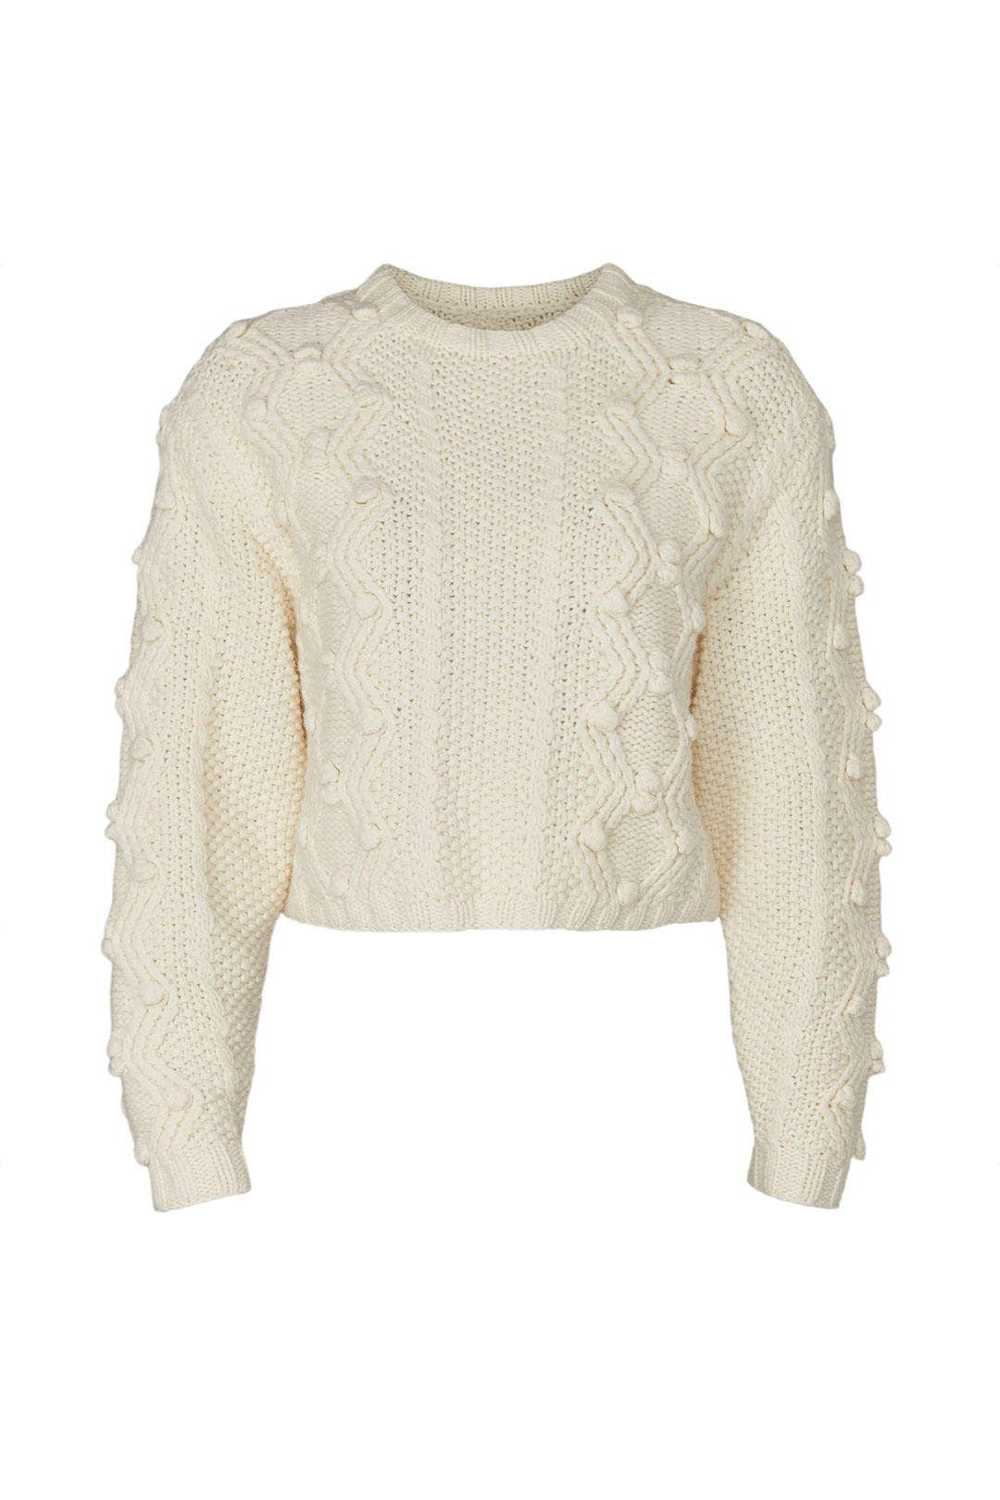 Divine Heritage Cropped Cable-Knit Sweater - image 5